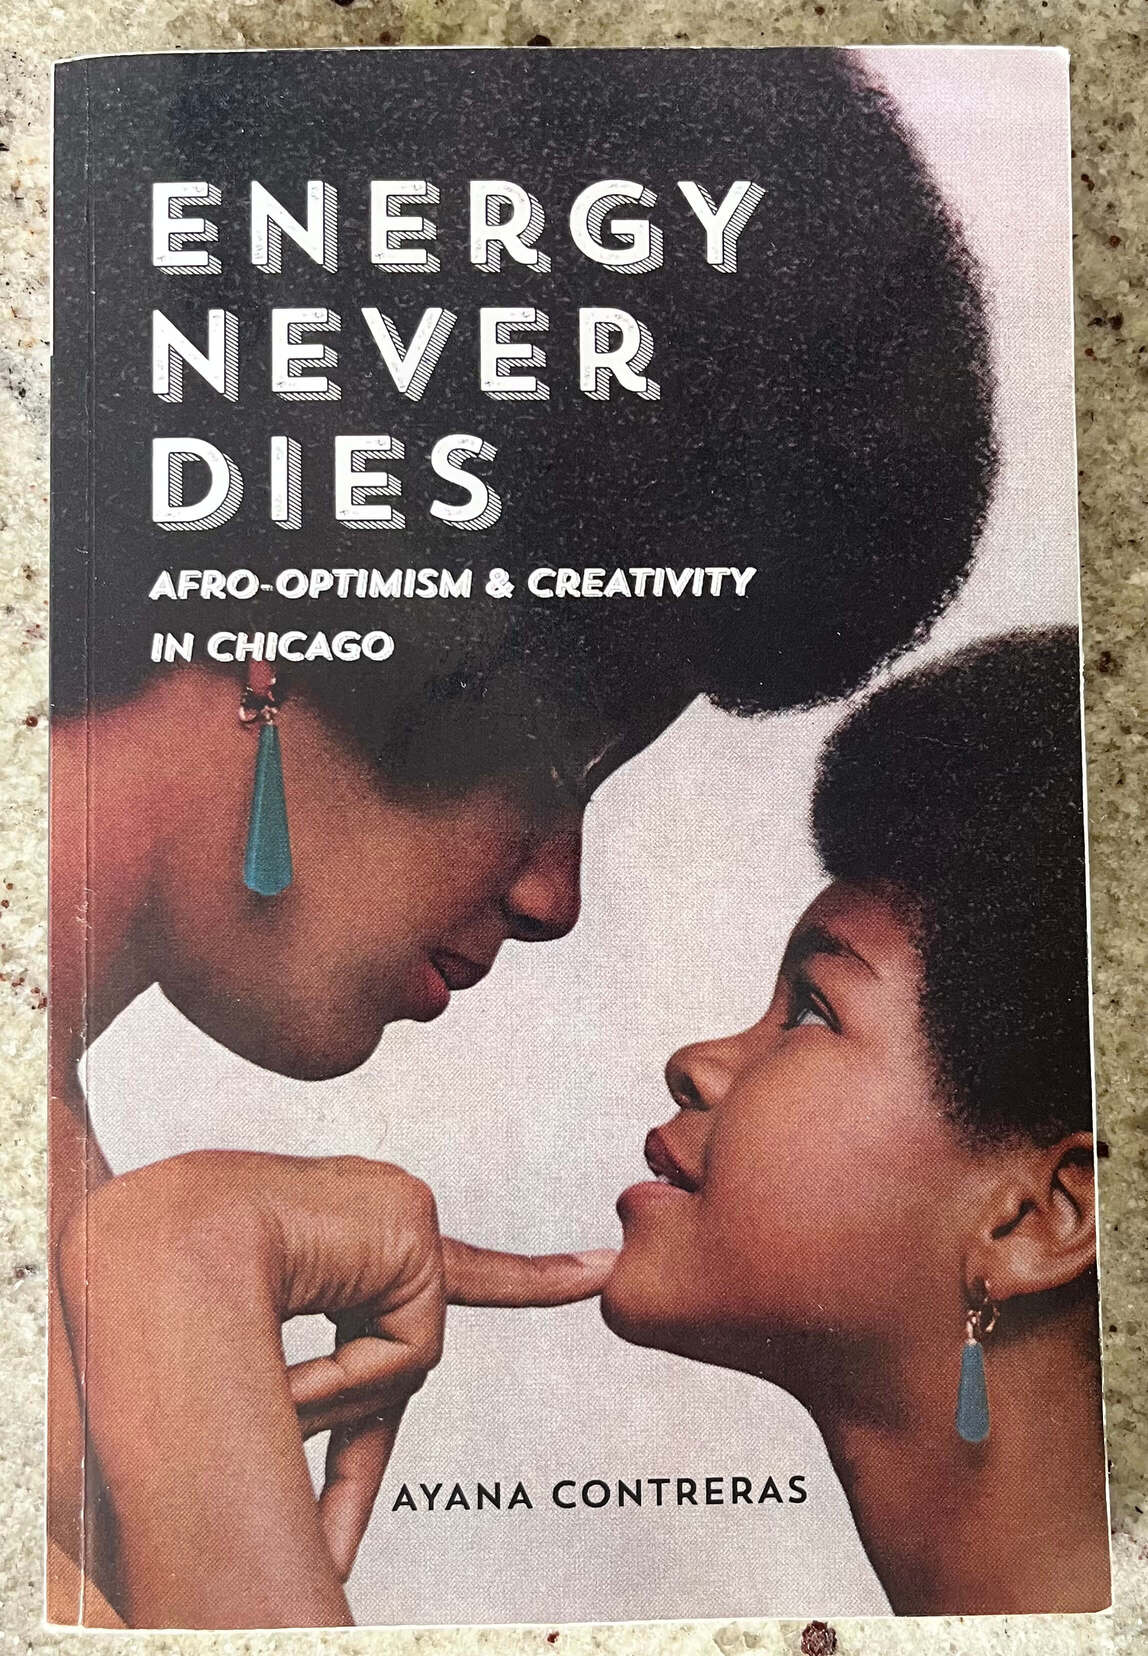 “Energy Never Dies: Afro-Optimism & Creativity In Chicago” by Ayana Contreras.